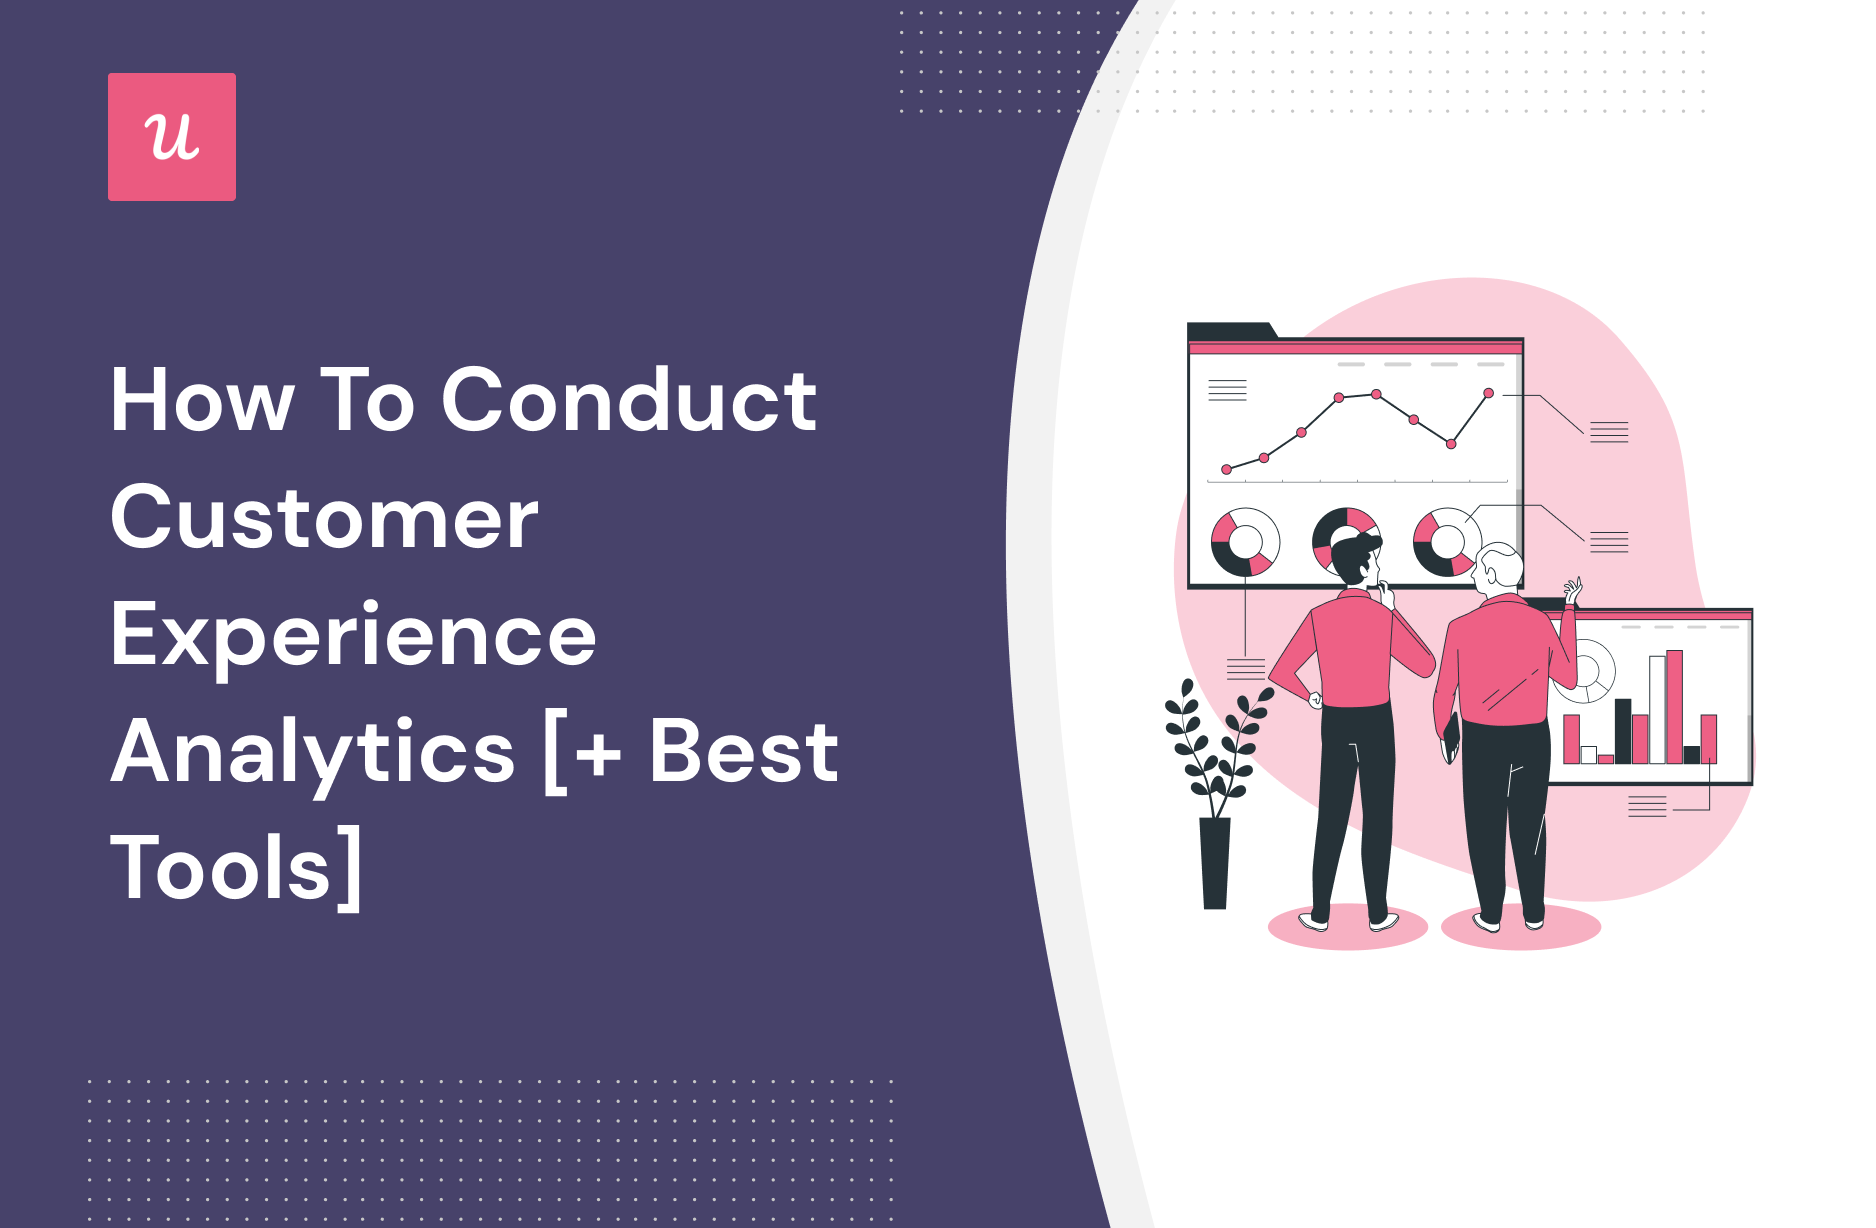 How to Conduct Customer Experience Analytics [+ Best Tools]